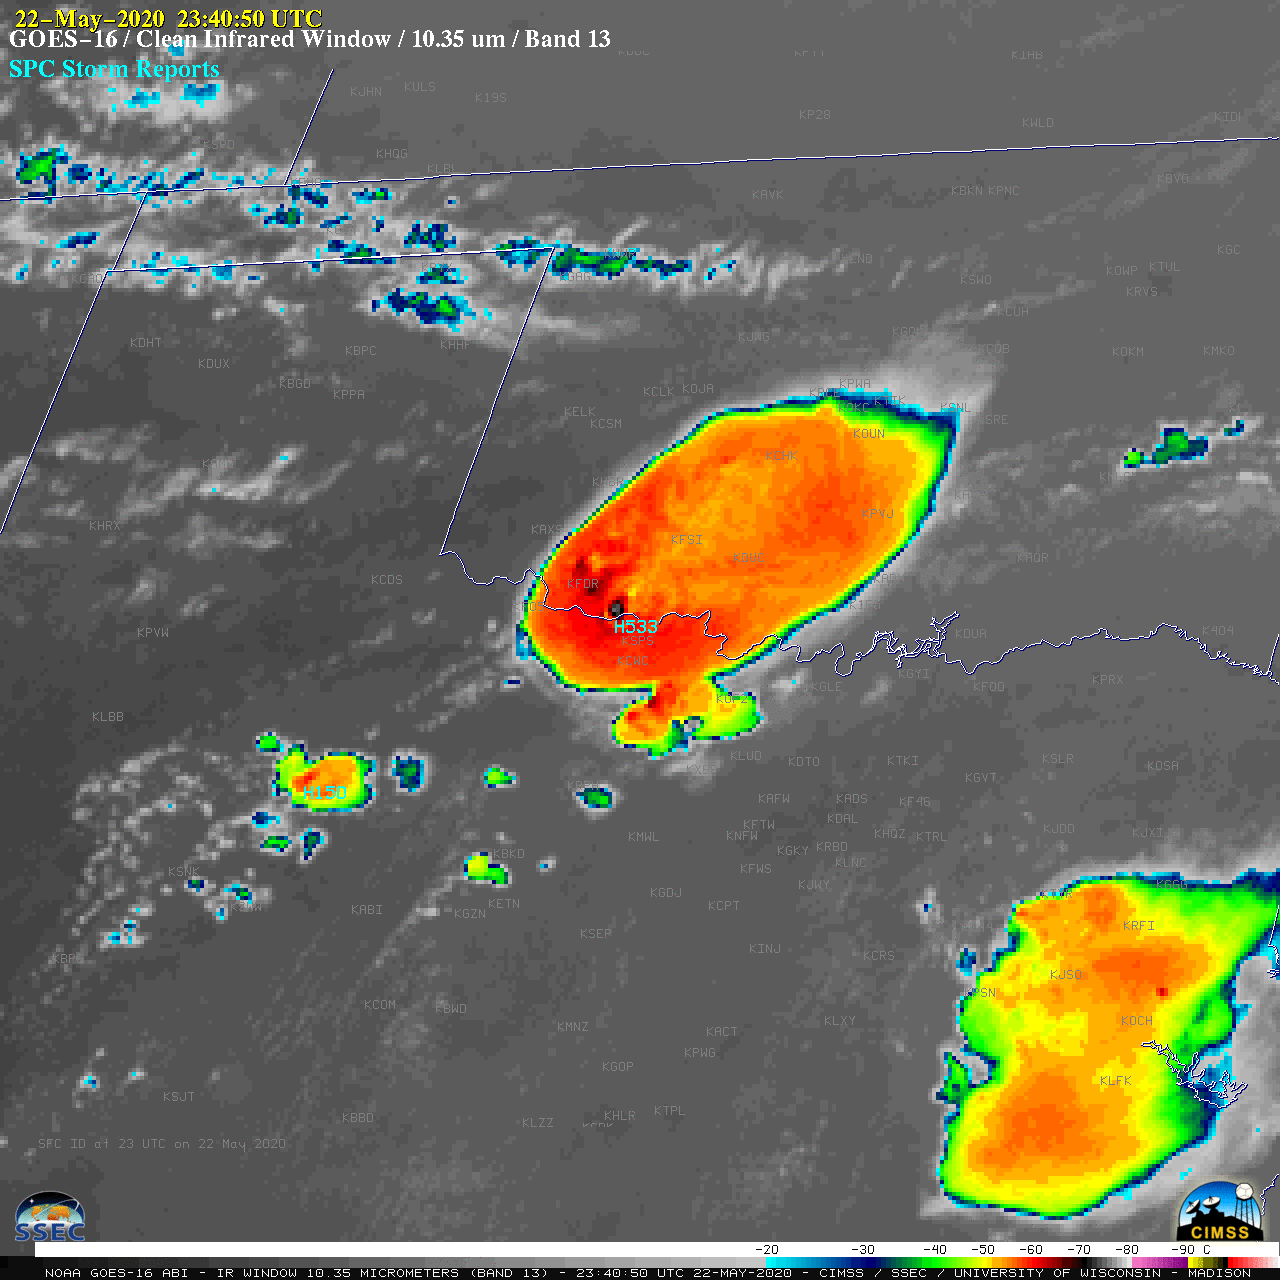 GOES-16 “Clean” Infrared Window (10.3 µm) images, with SPC storm reports plotted in cyan [click to play animation | MP4]